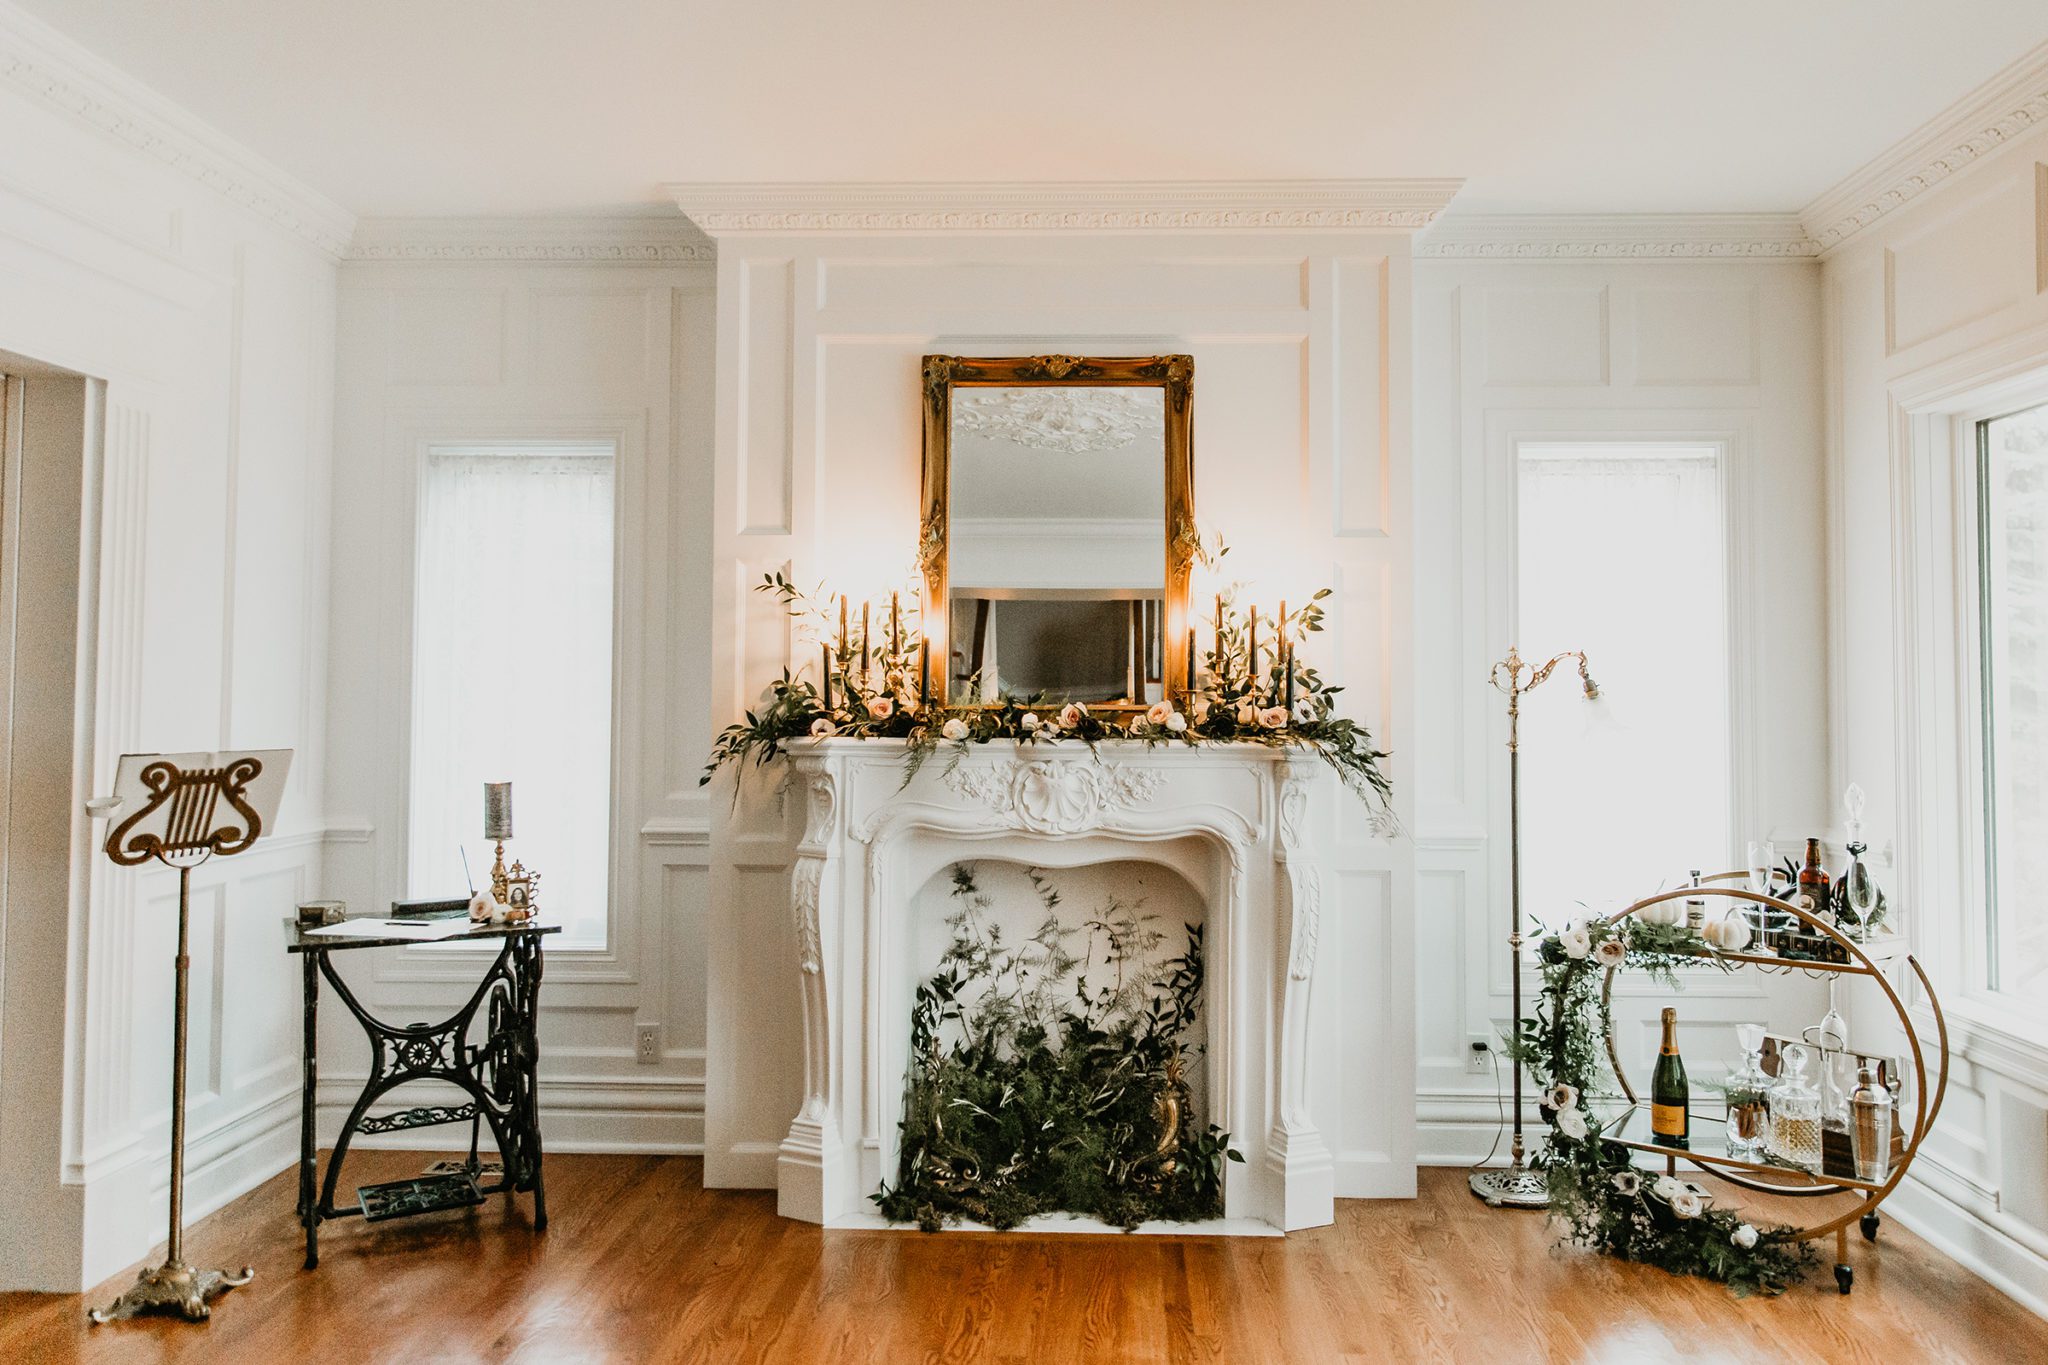 Elegant and romantic ceremony design inspiration for a living room wedding with a white fireplace